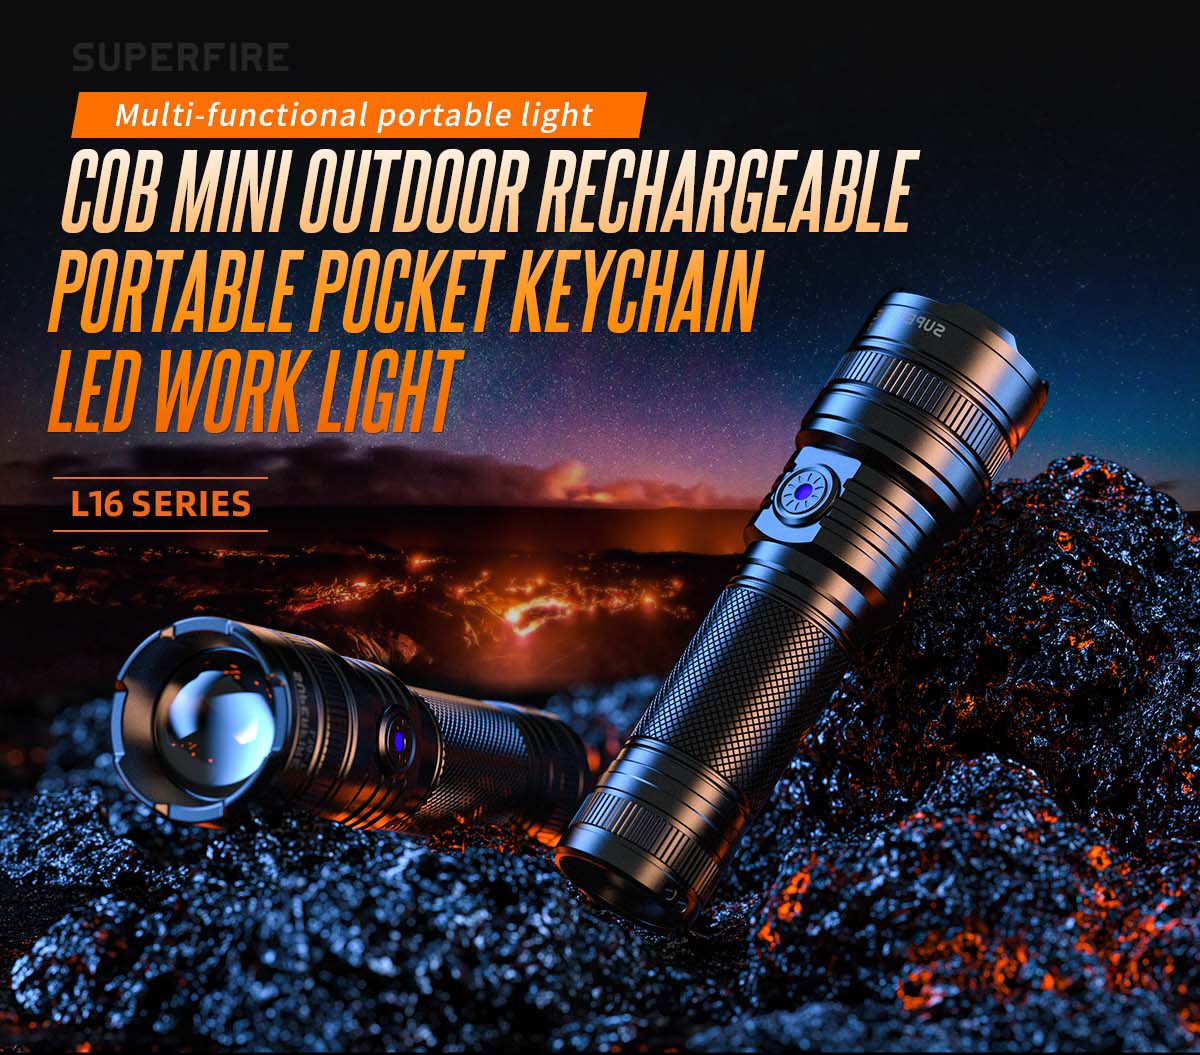 Top 10 Reasons Why You Should Choose SUPERFIRE Telescopic Flashlights